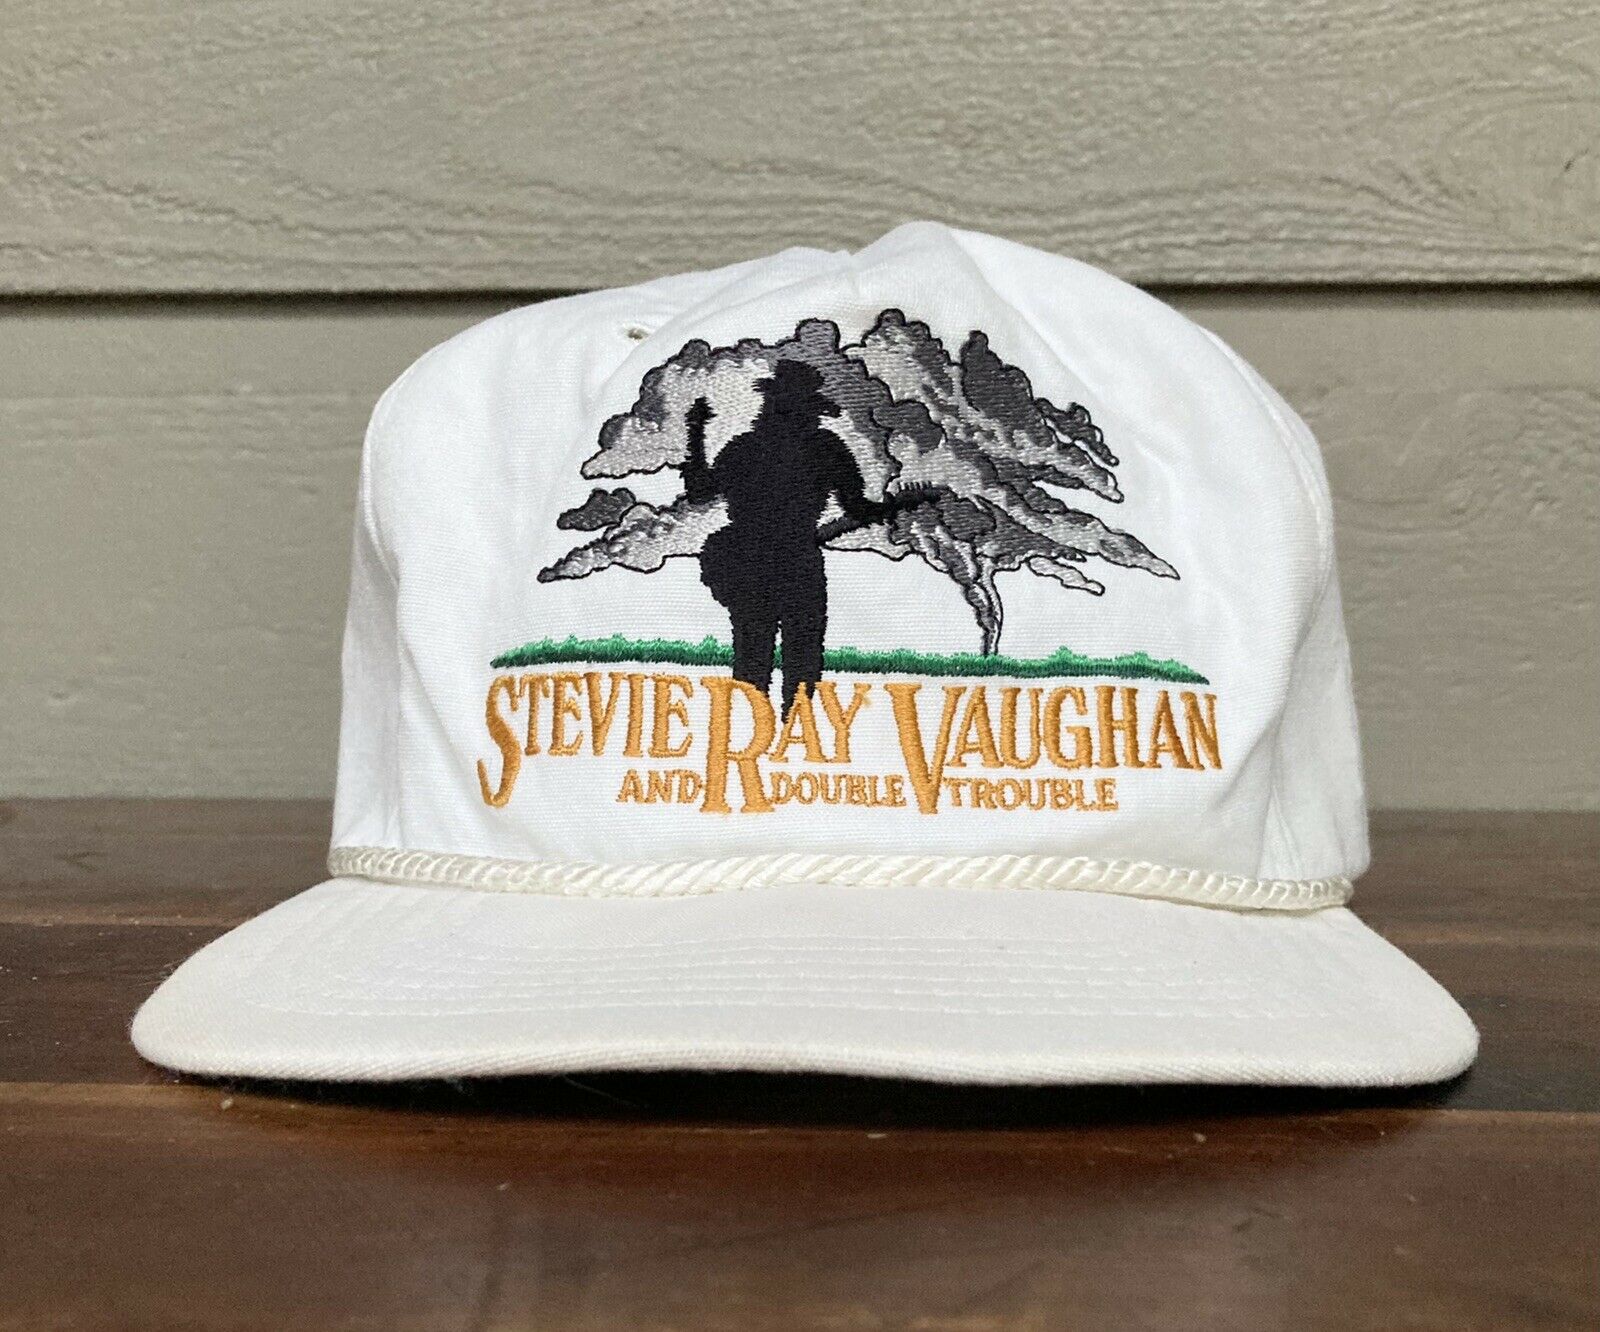 Vtg Stevie Ray Vaughan Tour Hat Shirt 1984 Couldn’t Stand The Weather Concert